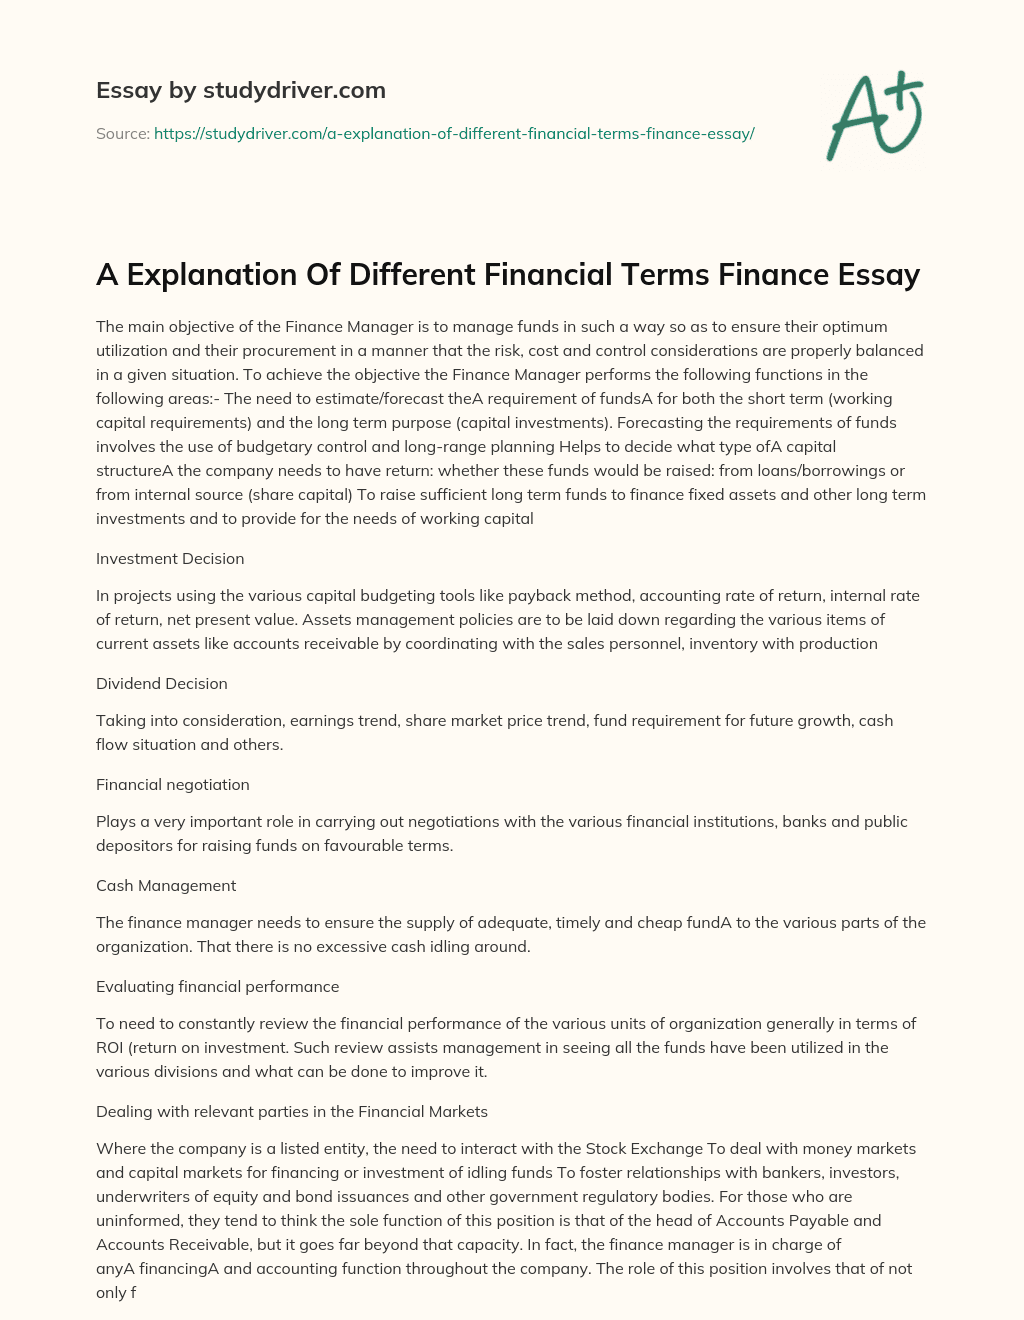 A Explanation of Different Financial Terms Finance Essay essay